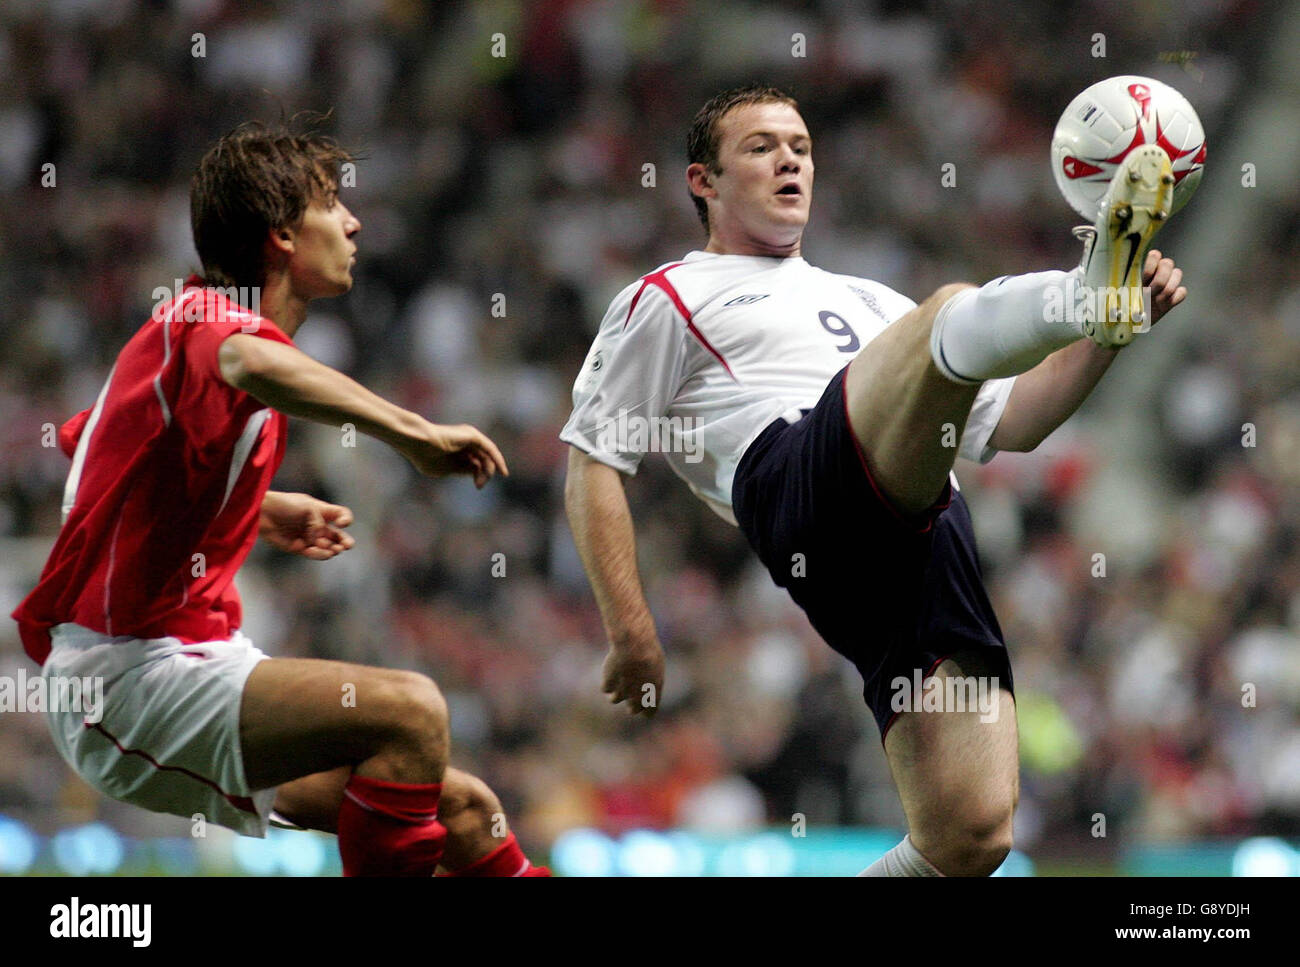 England's Wayne Rooney (R) challenges Poland's Euzebiusz Smolarek during the World Cup qualifying match at Old Trafford, Manchester, Wednesday October 12, 2005. PRESS ASSOCIATION Photo. Photo credit should read: Martin Rickett/PA. Stock Photo